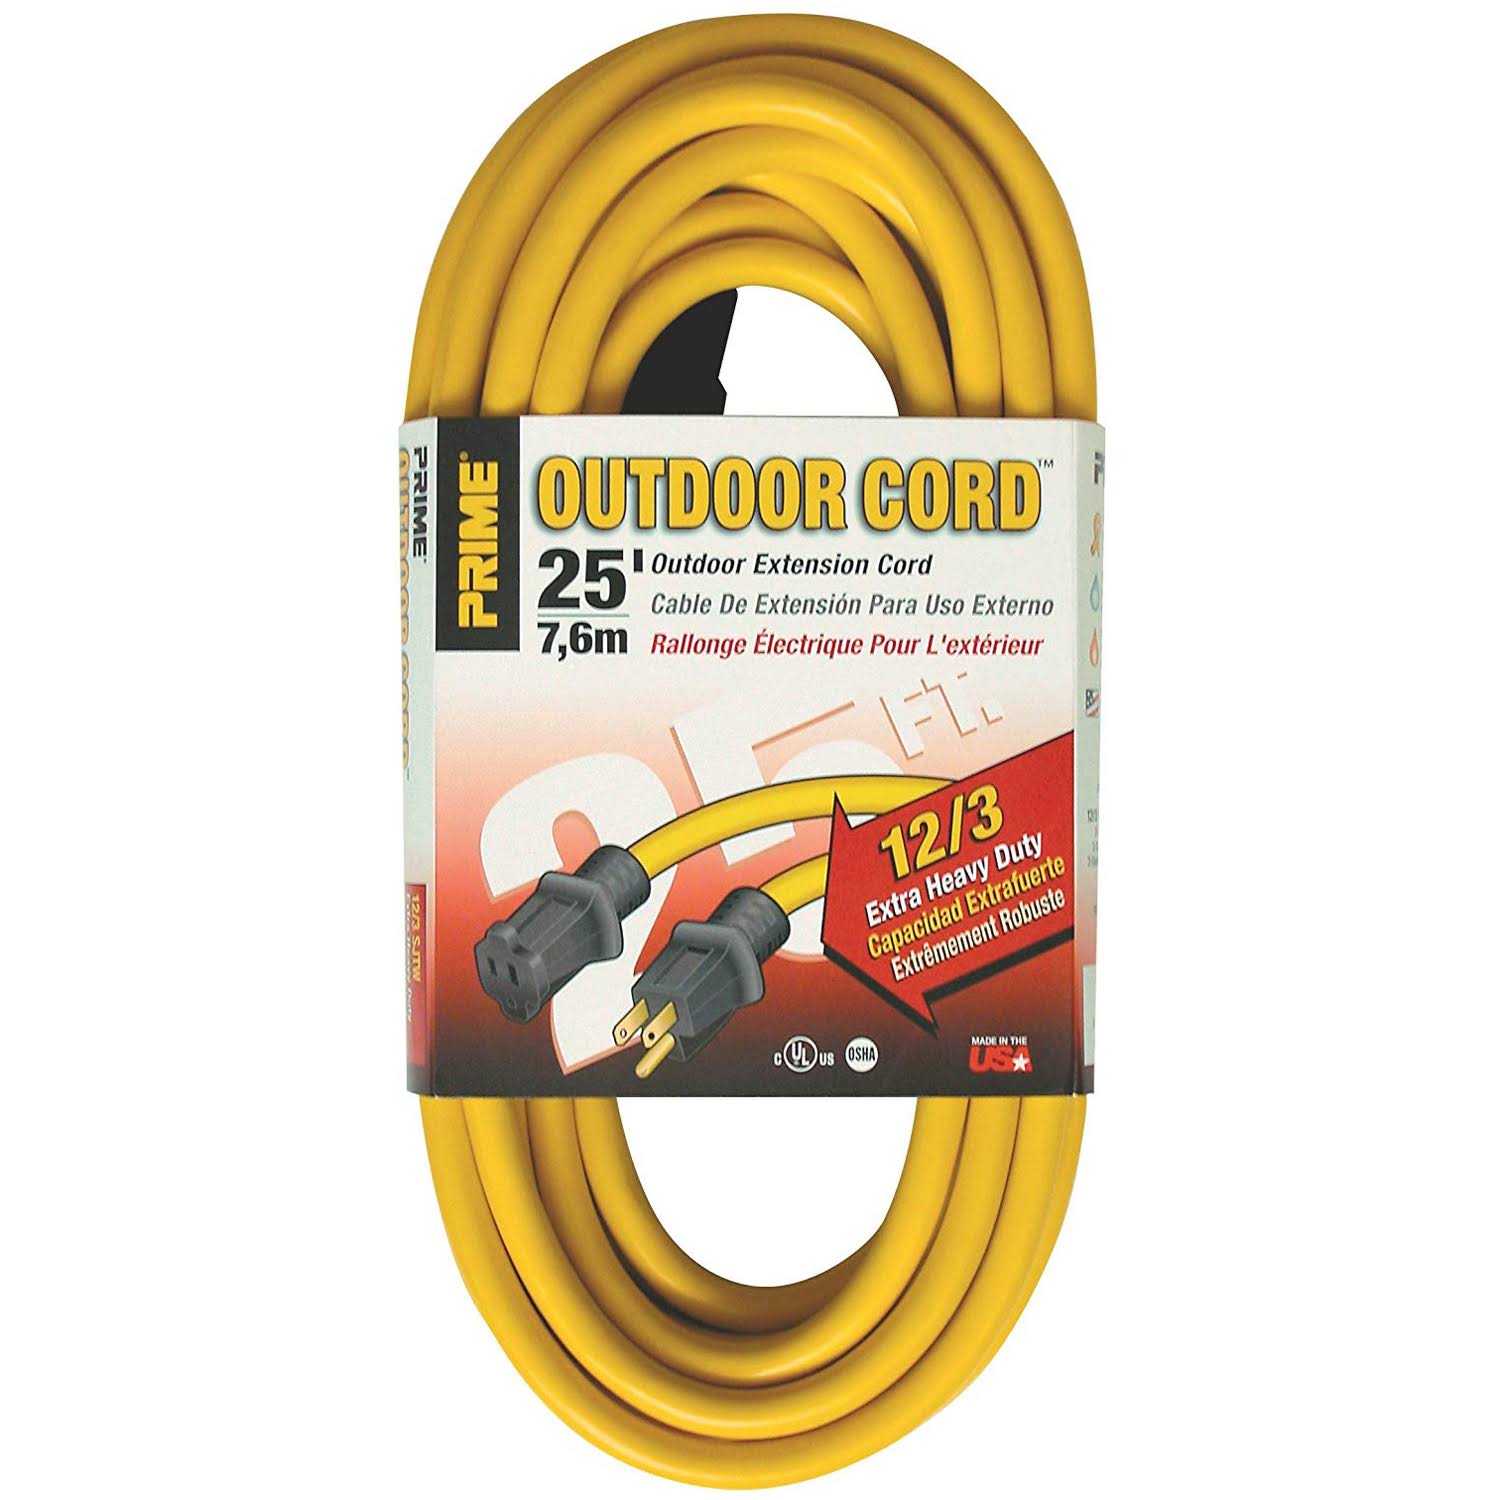 Prime Wire and Cable EC500825 12/3 SJTW Jobsite Outdoor Extension Cord - Yellow, 25'